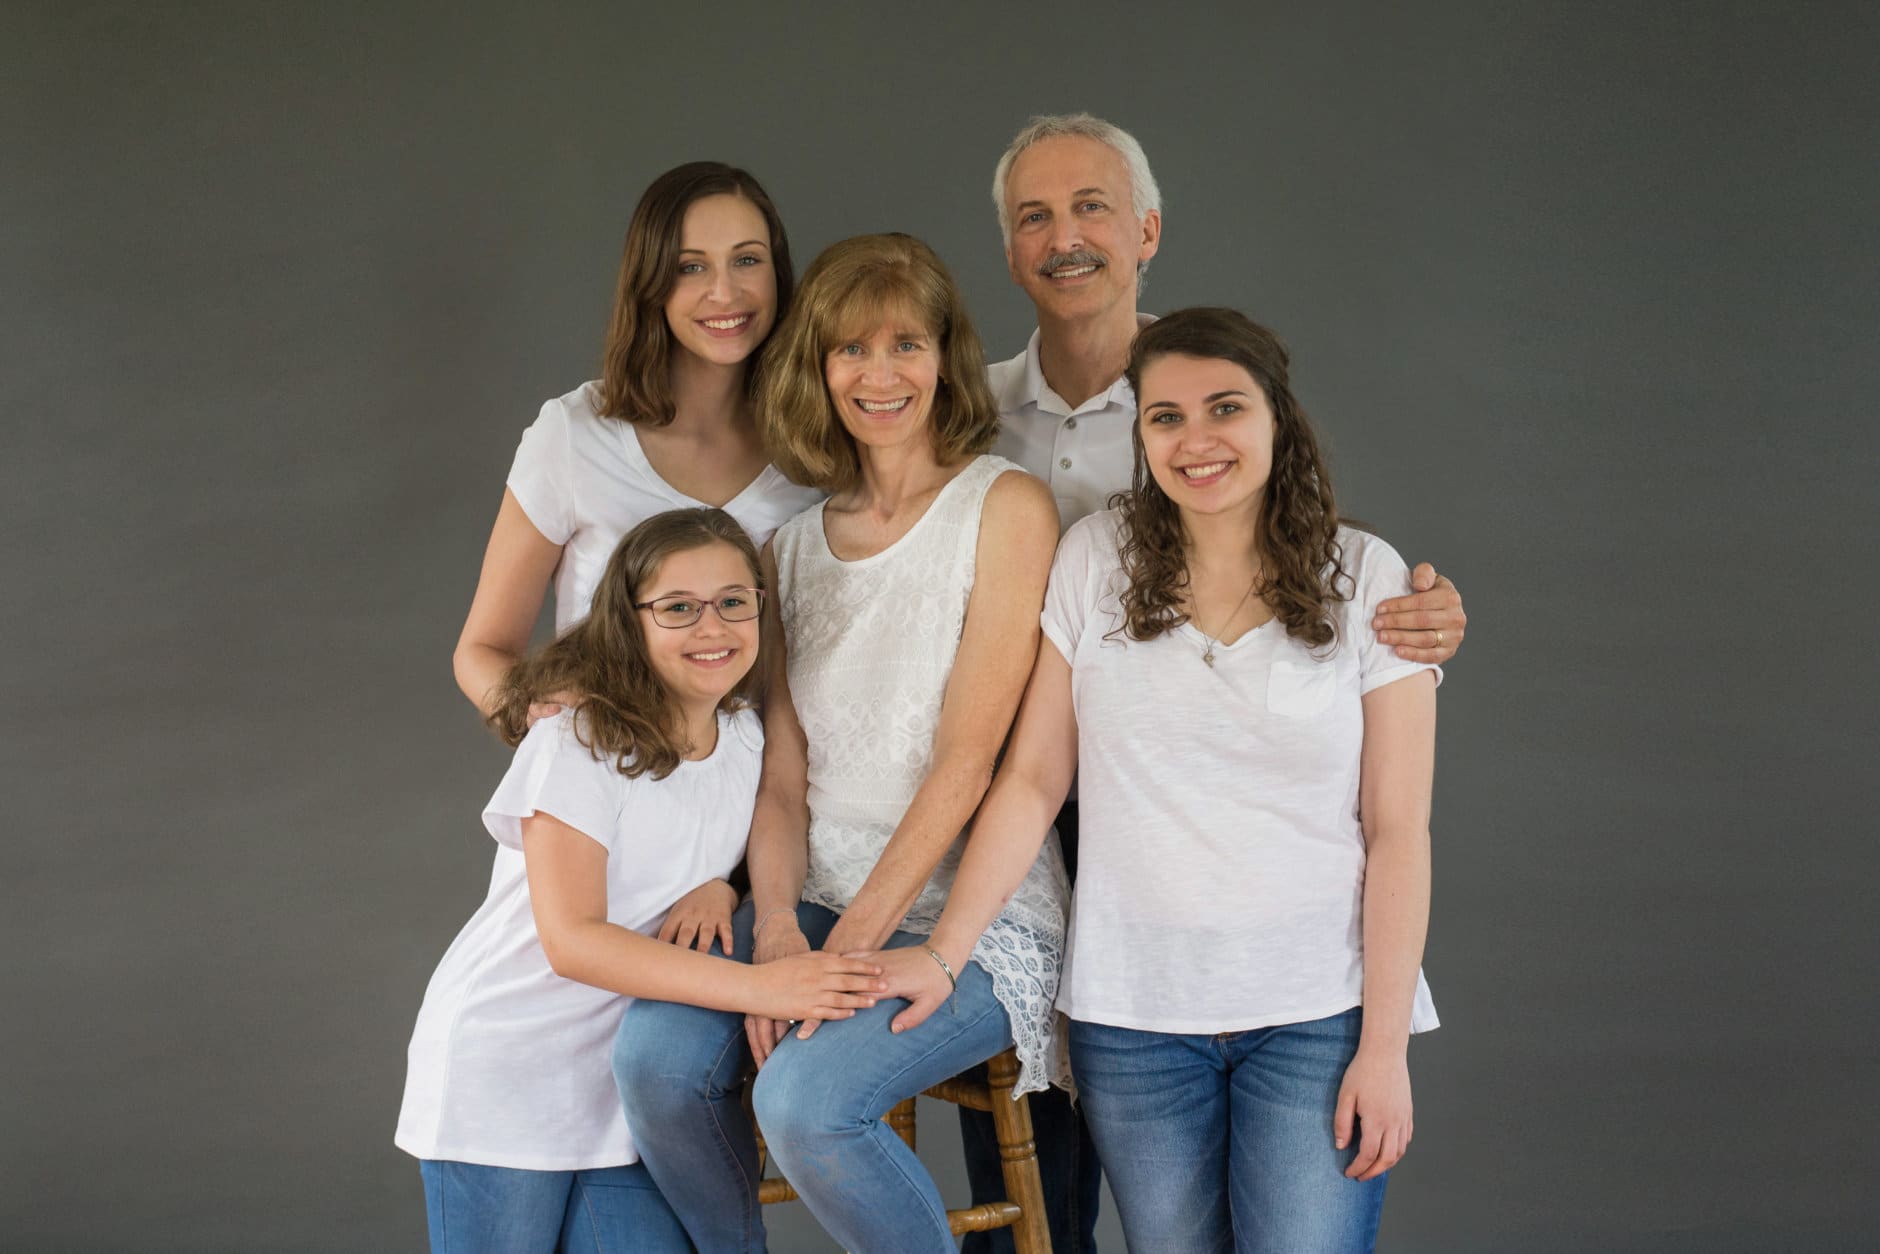 The Lang Family: Hannah, Mike, Kelly, Olivia and Anya. Seventeen years ago, several of the family members were involved in a crash that almost killed Olivia. (Courtesy / Sharon Hallman Photography)